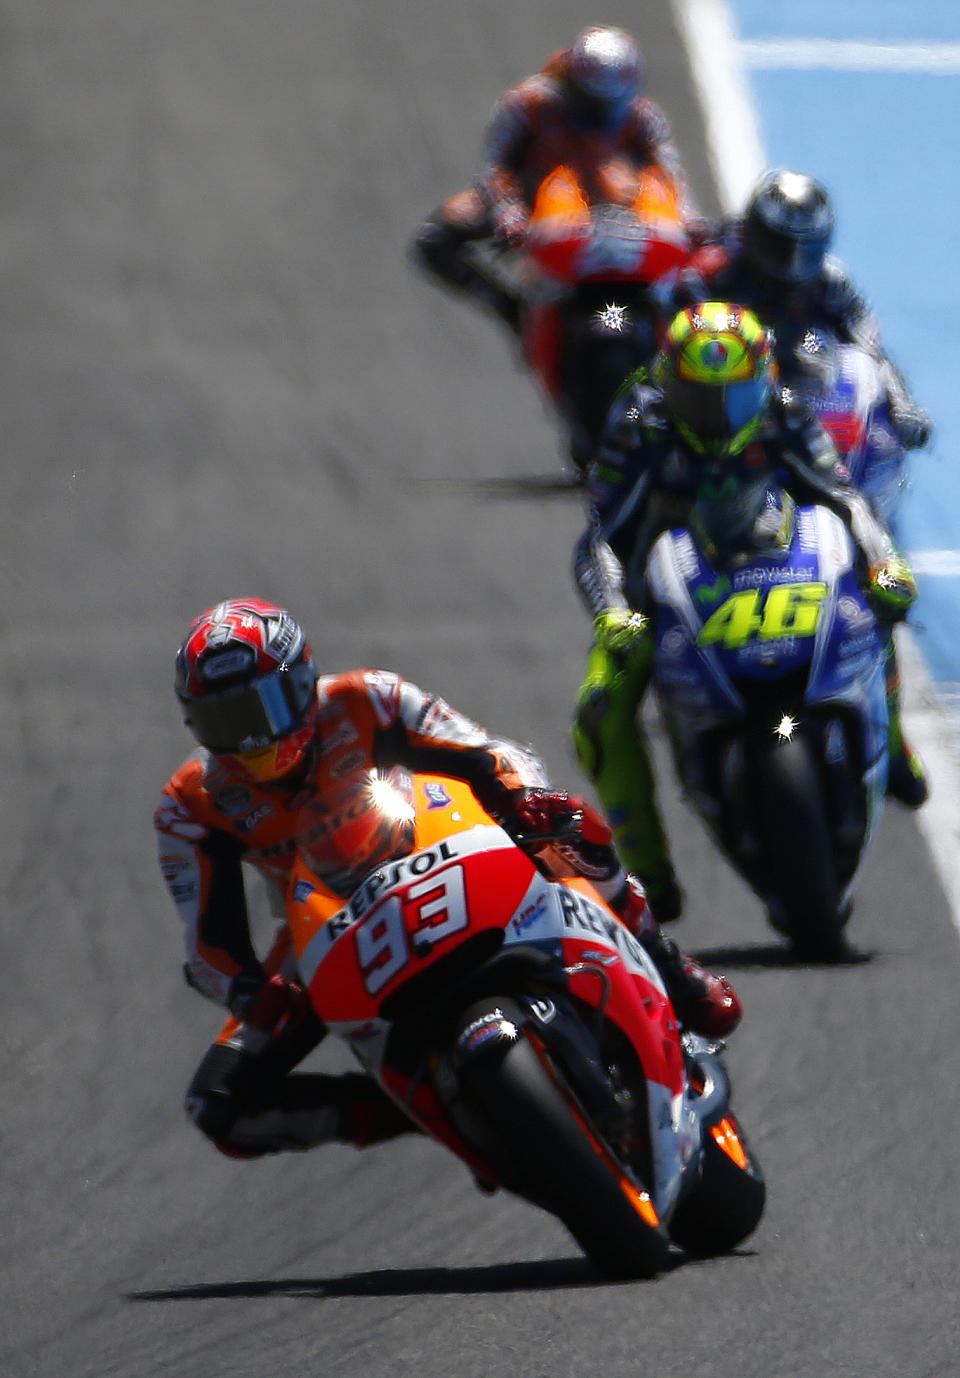 MotoGP raider Marc Marquez of Spain leads the race followed by Valentino Rossi of Italy and Jorge Lorenzo of Spain during the Spain's Motorcycle Grand Prix at the Jerez race track on Sunday, May 4, 2014 in Jerez de la Frontera, southern Spain. (AP Photo/Miguel Angel Morenatti)